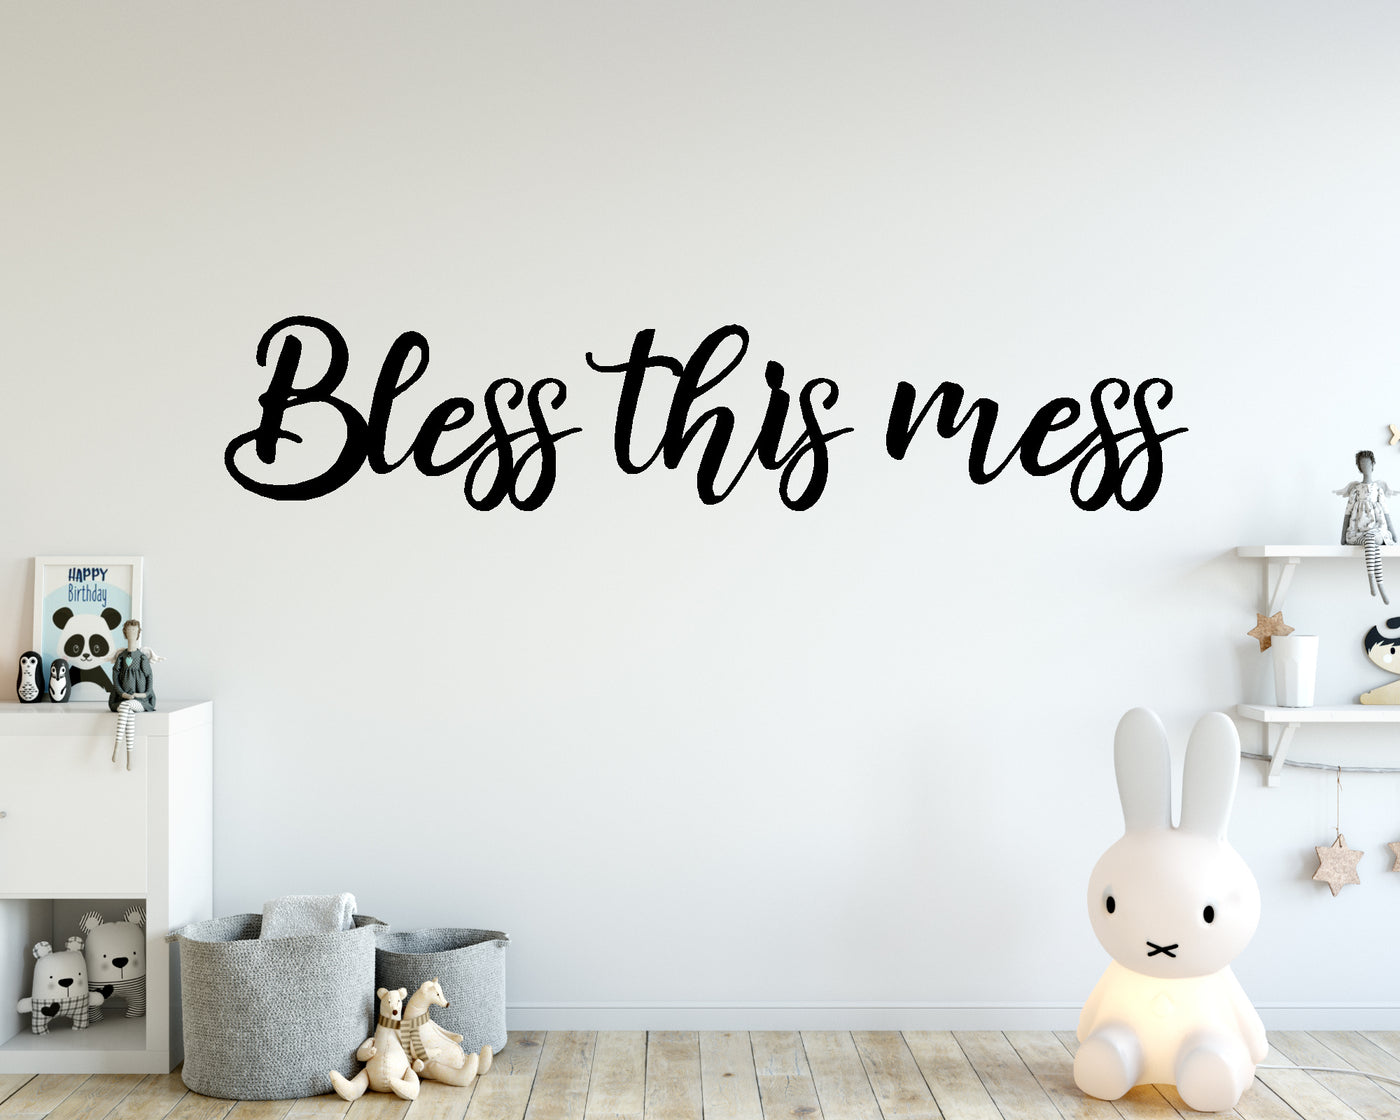 Bless This Mess Metal Word Sign - Madison Iron and Wood - Metal Word Art - metal outdoor decor - Steel deocrations - american made products - veteran owned business products - fencing decorations - fencing supplies - custom wall decorations - personalized wall signs - steel - decorative post caps - steel post caps - metal post caps - brackets - structural brackets - home improvement - easter - easter decorations - easter gift - easter yard decor